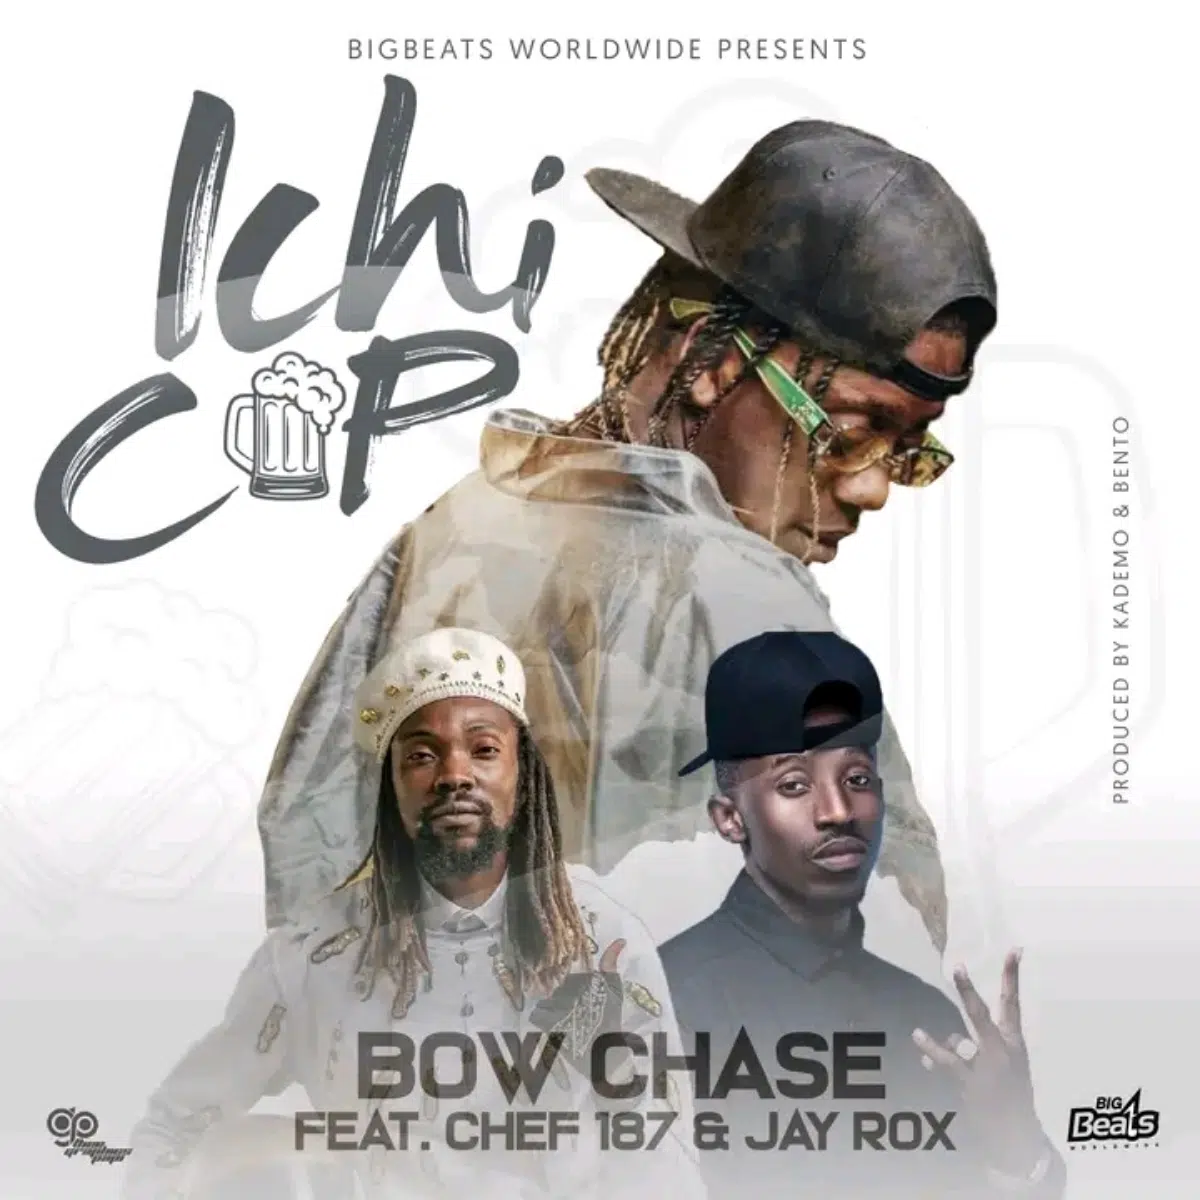 DOWNLOAD: Bow Chase Ft Jay Rox & Chef 187 – “Ichi Cup” Mp3